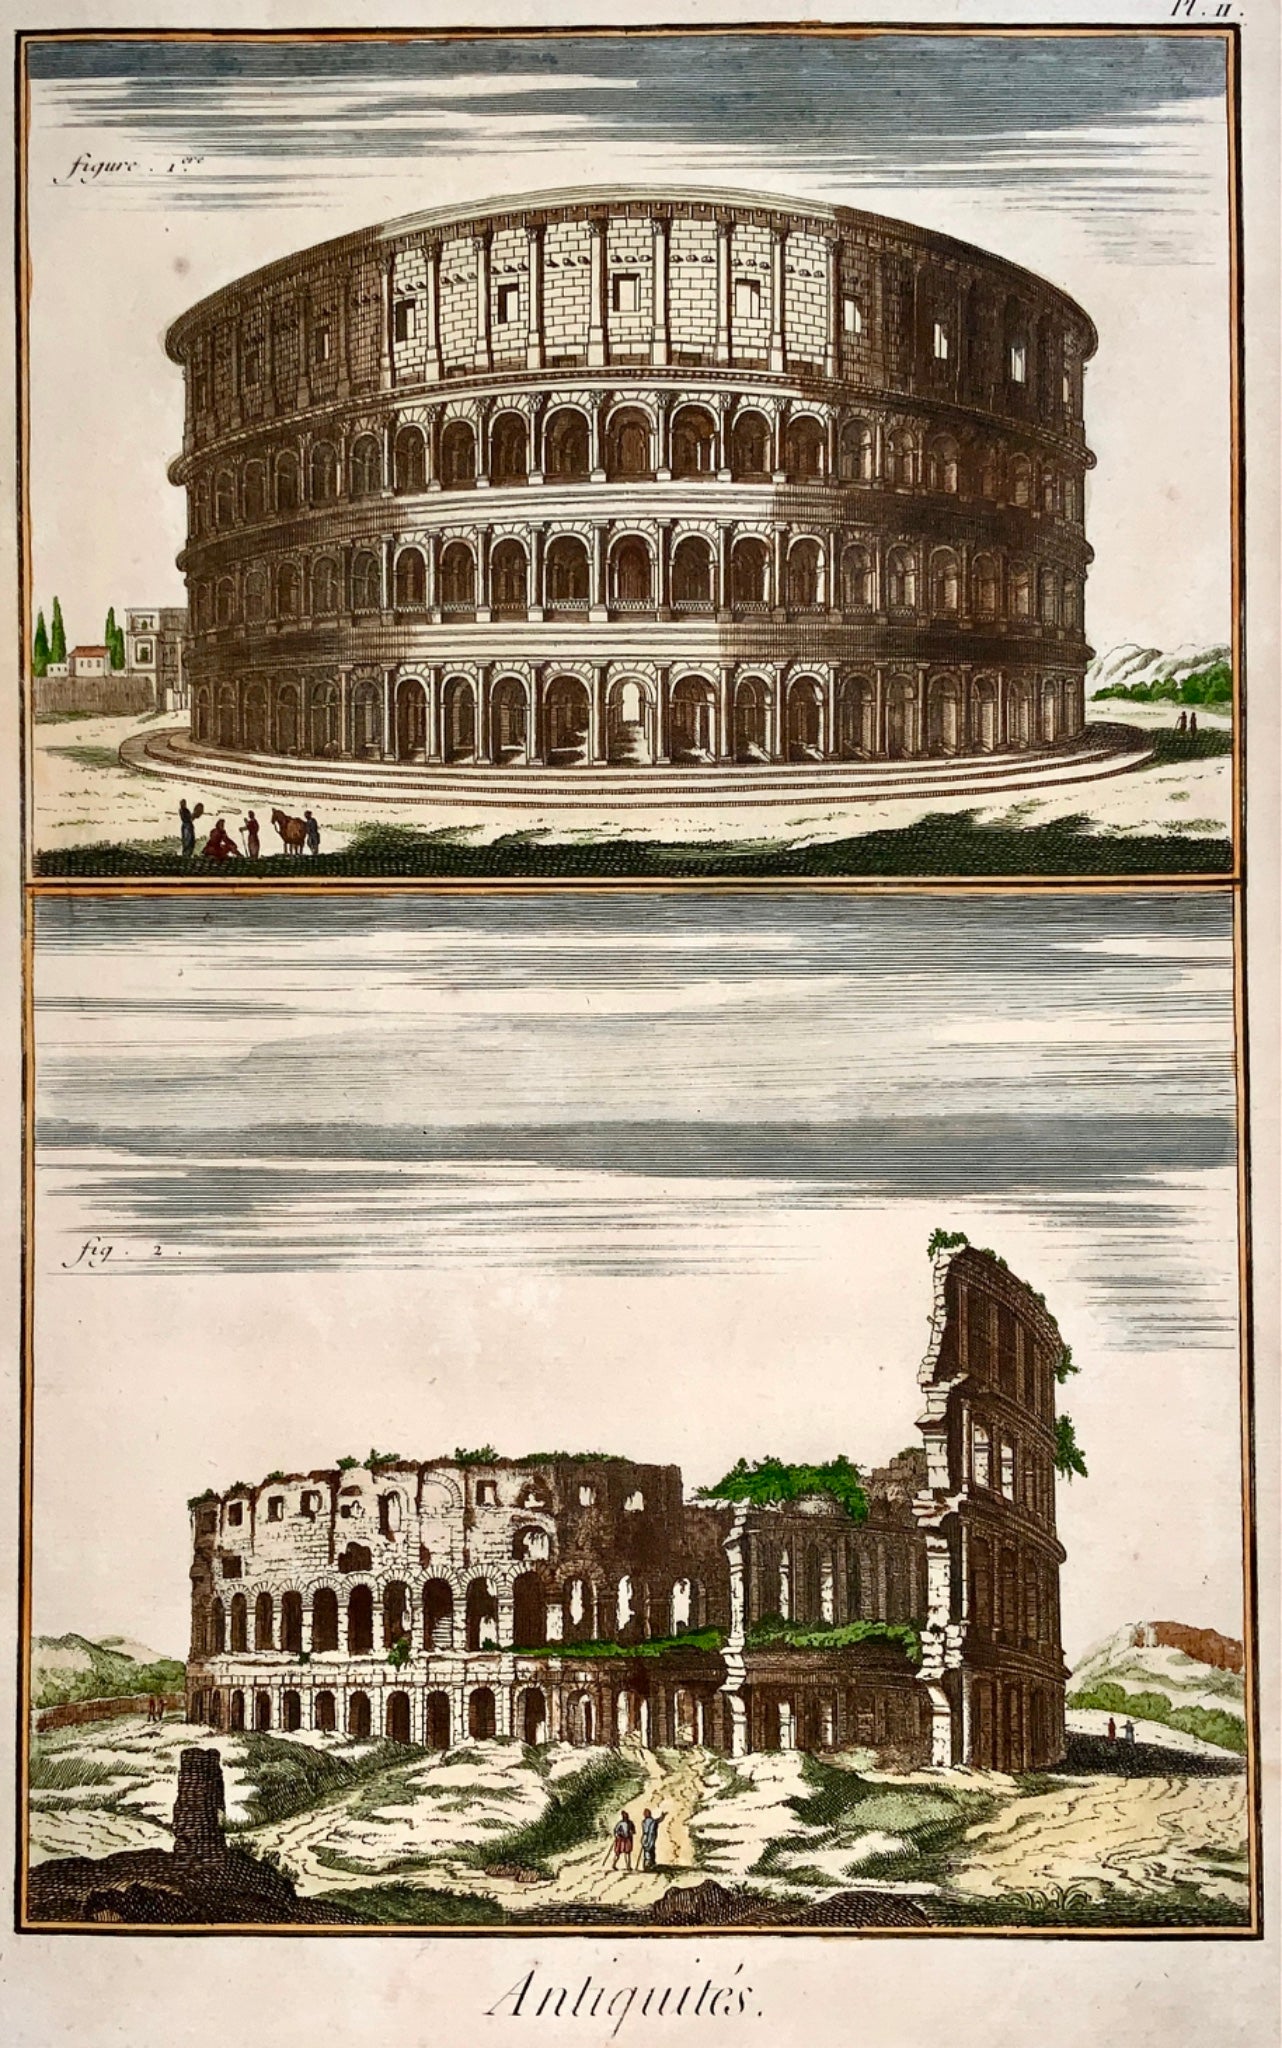 1777 Diderot - Italy: Rome, The Flavian COLOSSEUM copper engraving - Tall folio - Classical Art